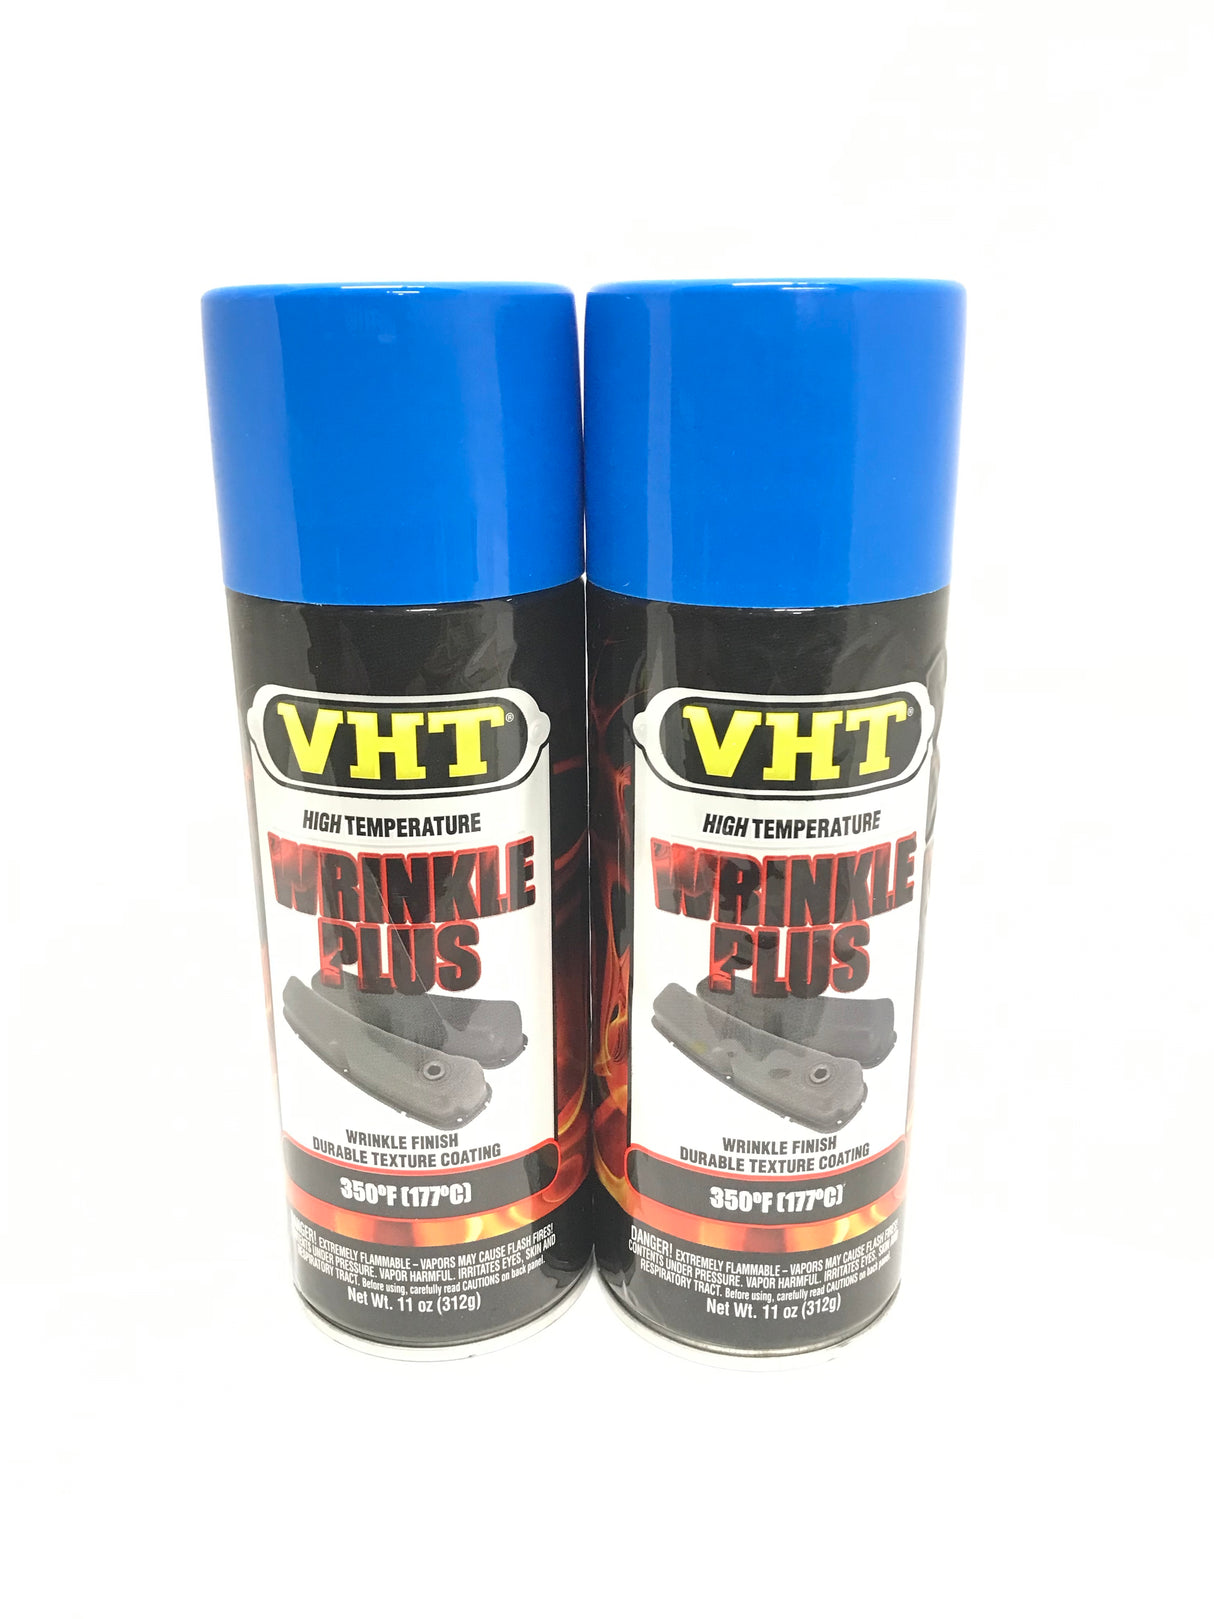 VHT SP206-2 PACK BLUE High Temperature Wrinkle Finish Durable Texture Coating - 11 oz